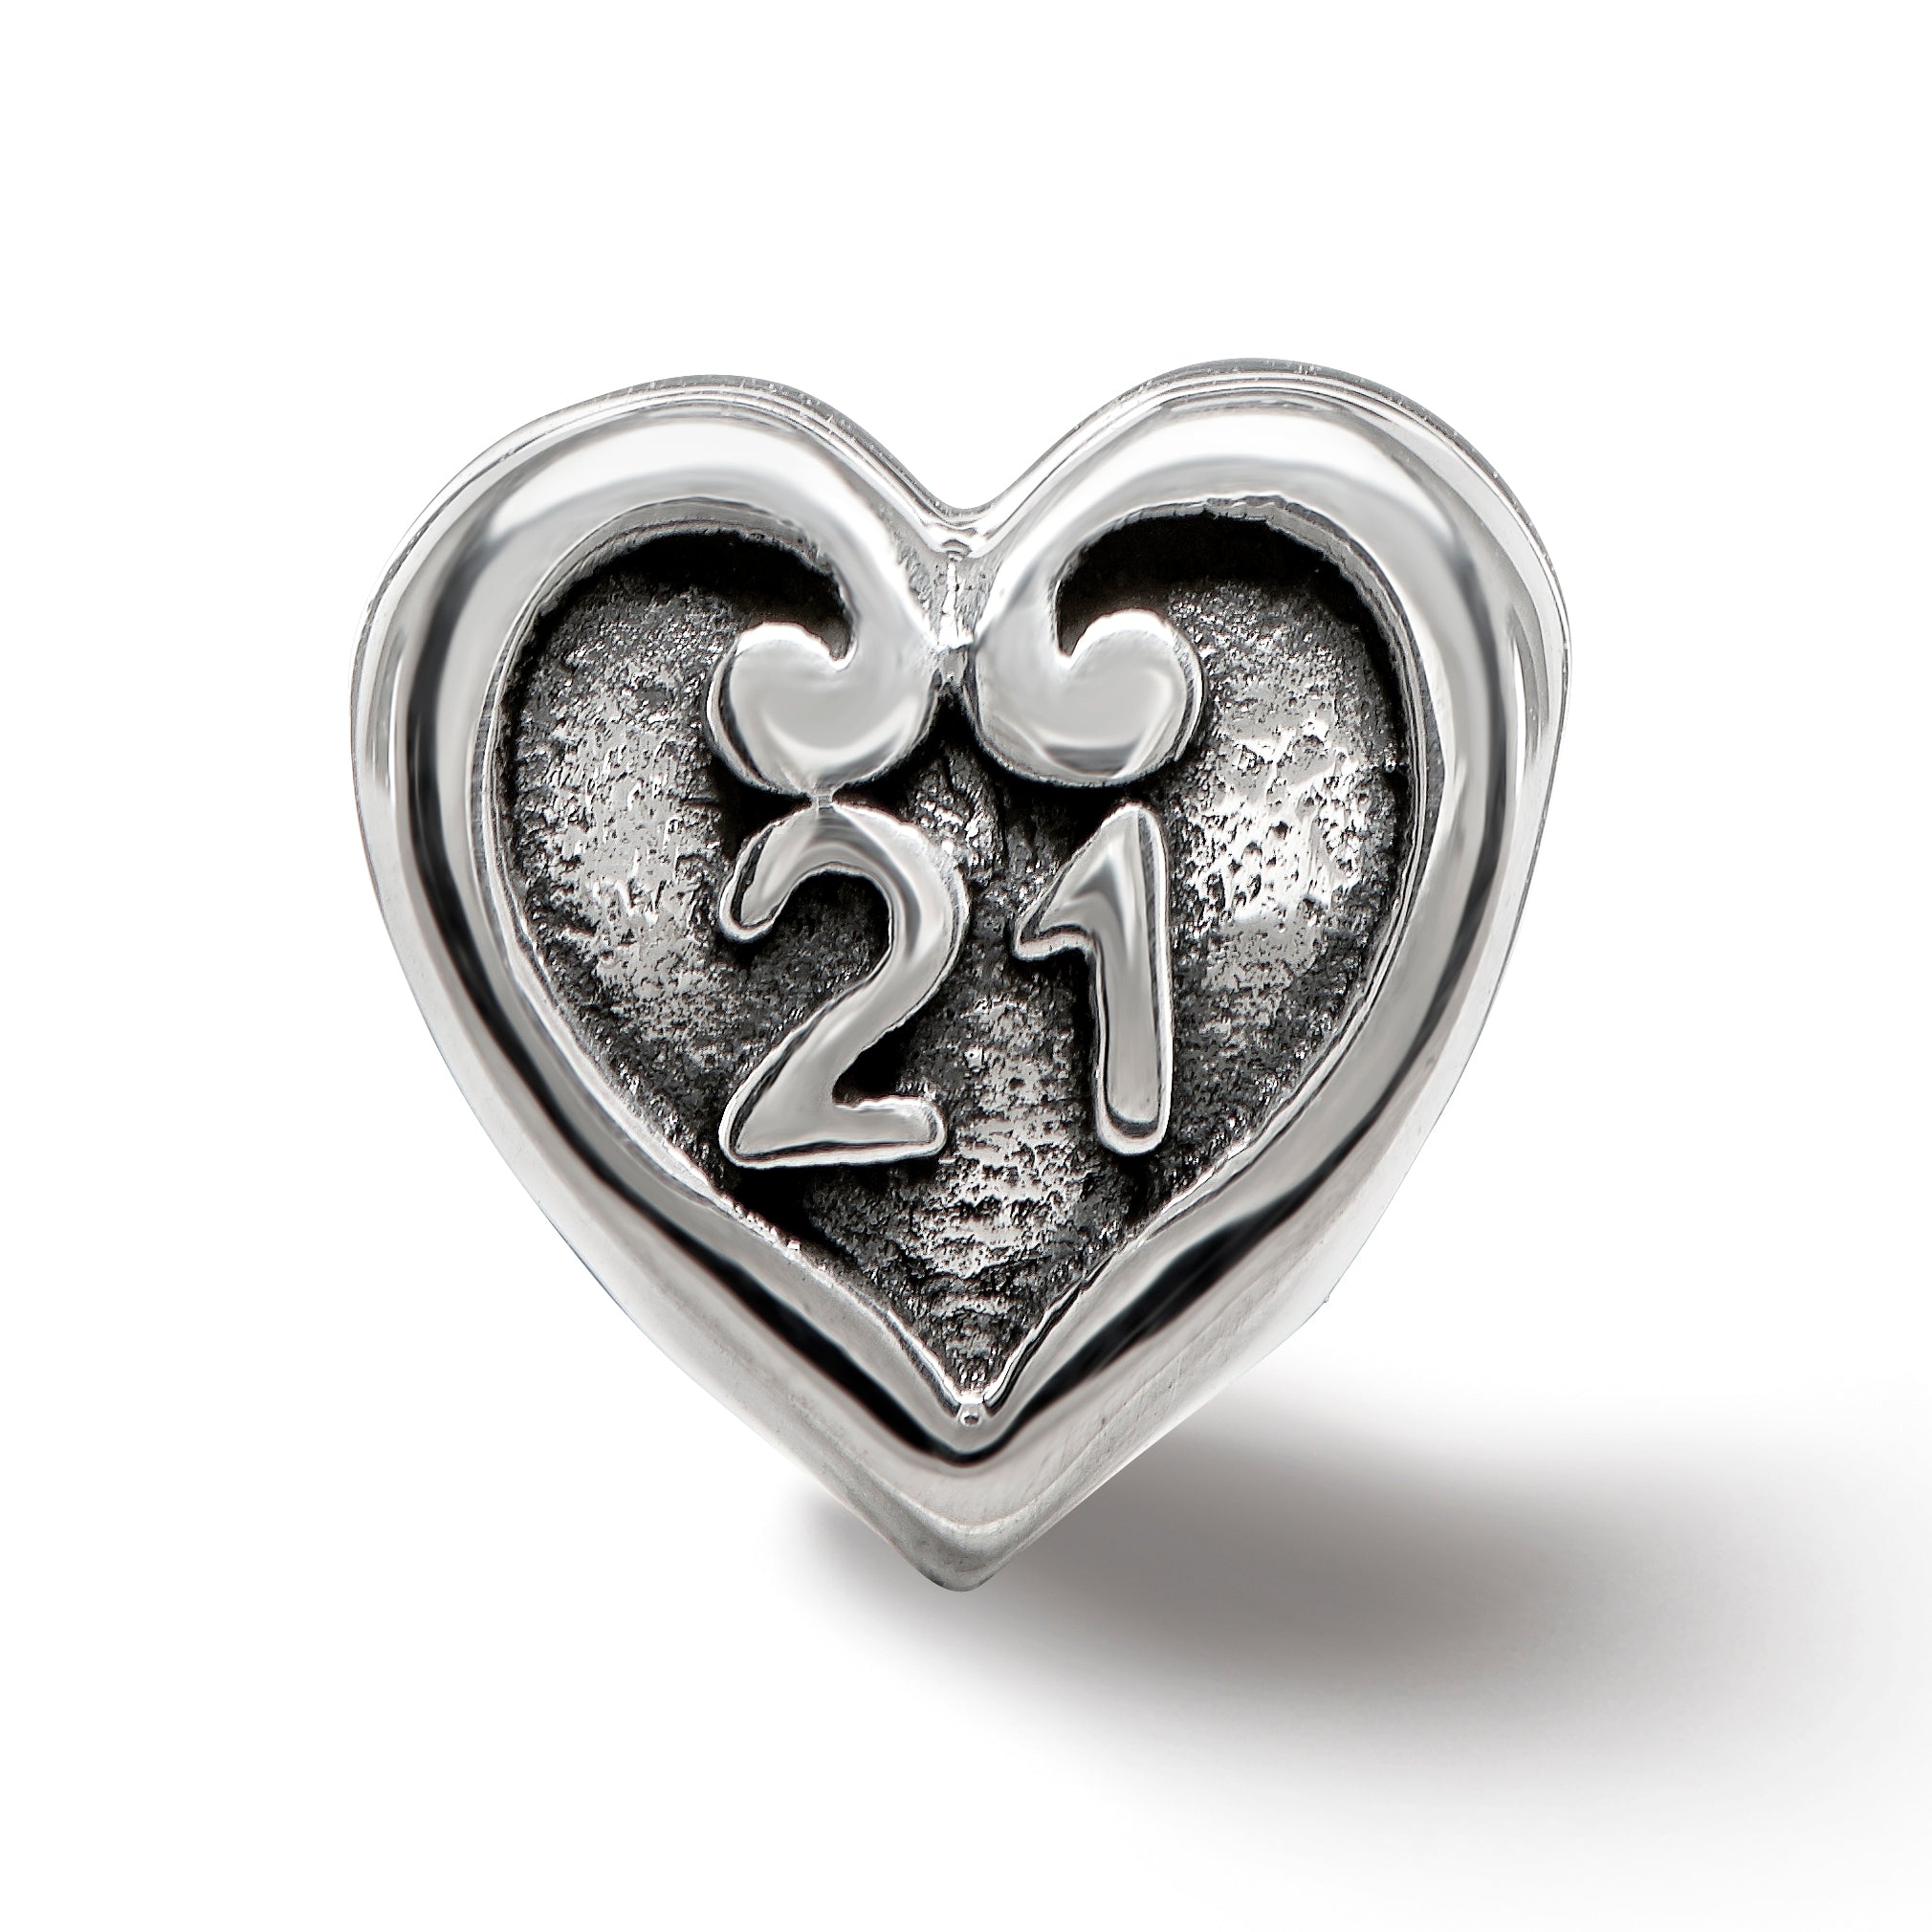 Sterling Silver Reflections 21 Heart Bead